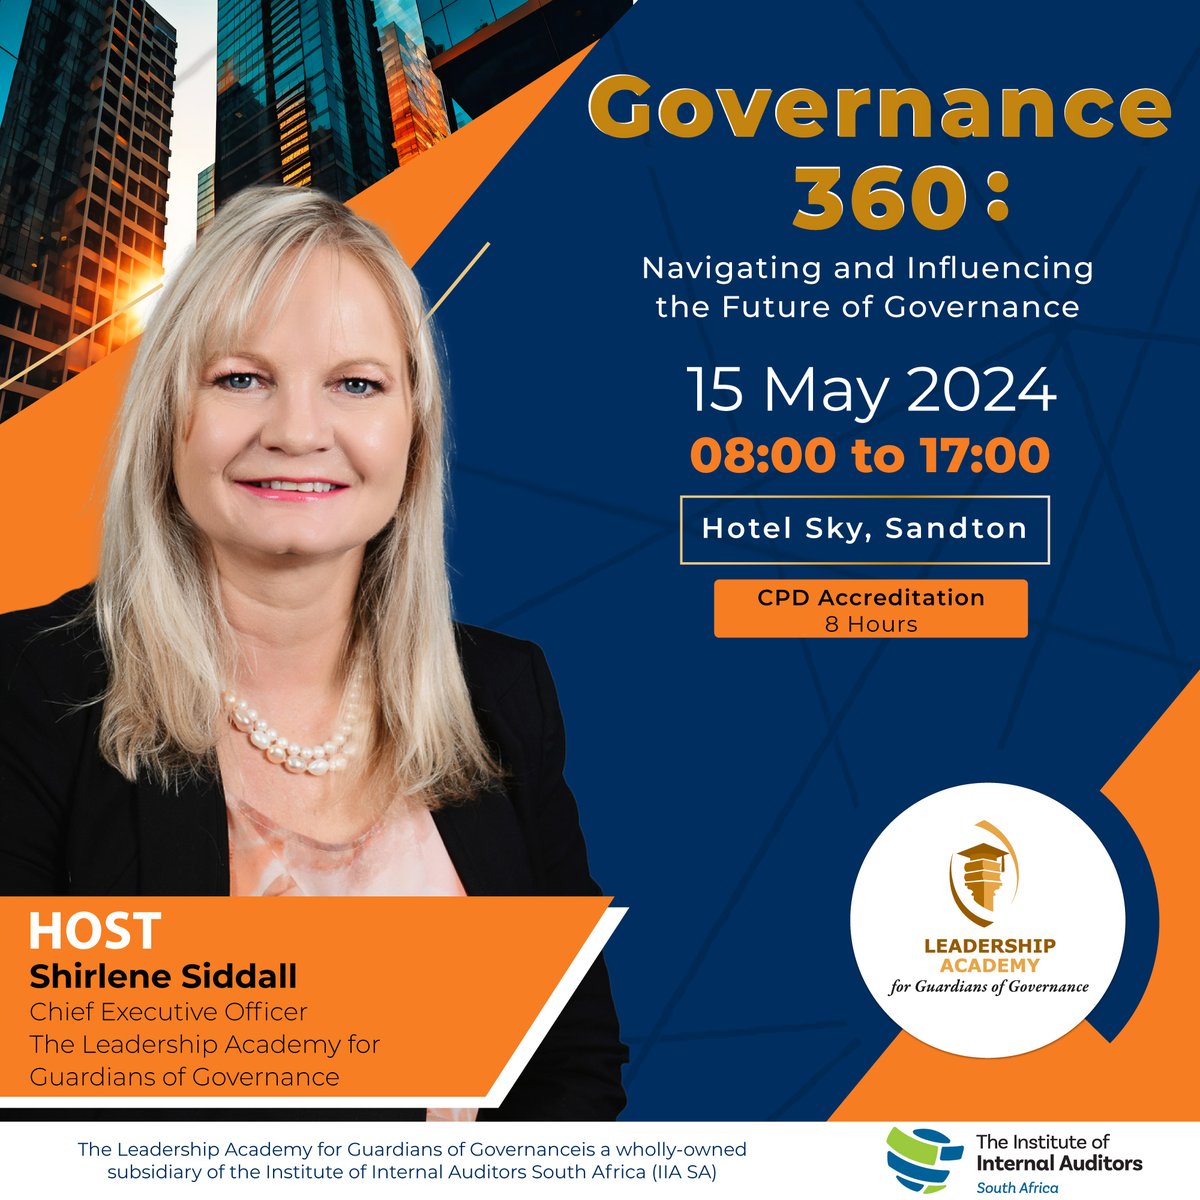 Join our CEO, Shirlene Siddall, at our upcoming Governance 360: Navigating and Influencing the Future of Governance Conference. Visit: evolve.eventoptions.co.za/register/gover… to register & learn more about our speakers, moderators and panellists.

@IIASOUTHAFRICA